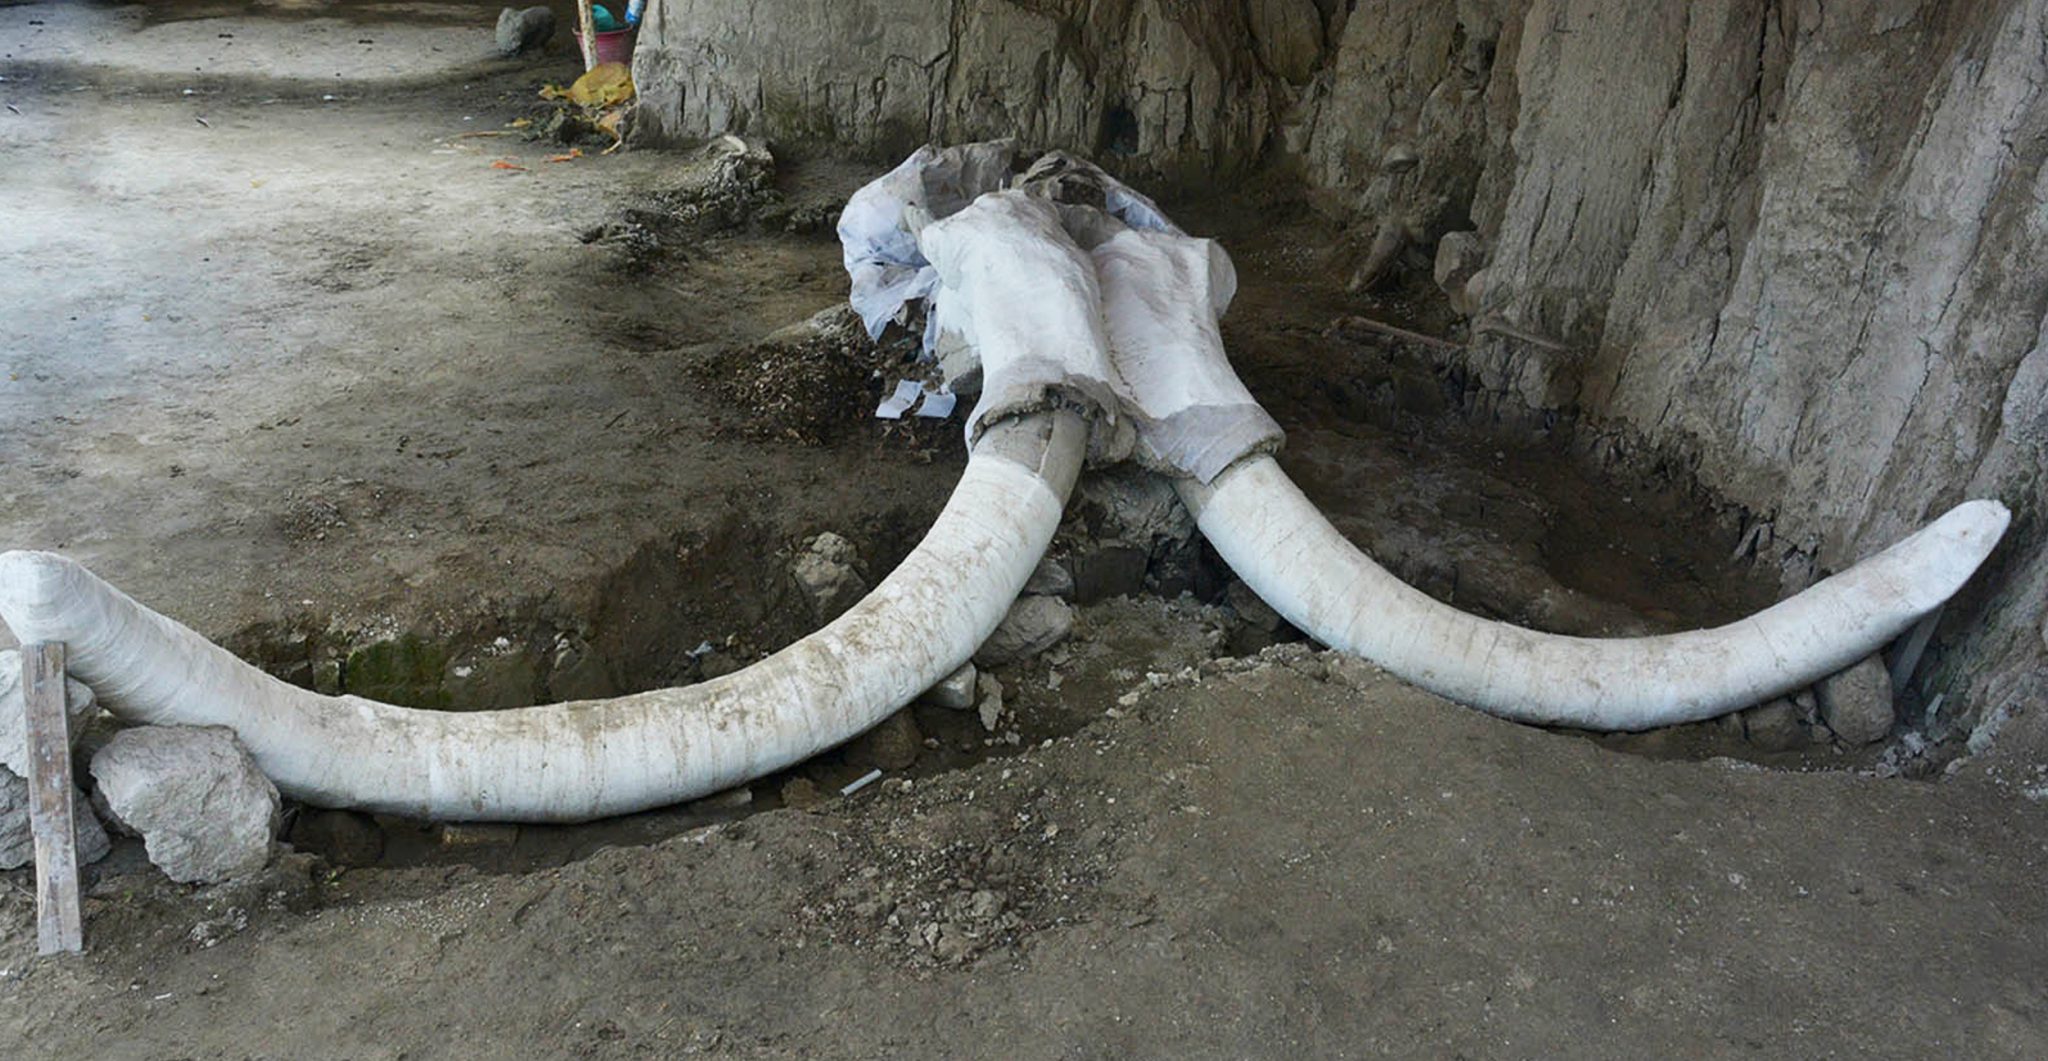 Mammoth bones. Photo: EDITH CAMACHO, The National Institute of Anthropology and History (INAH)